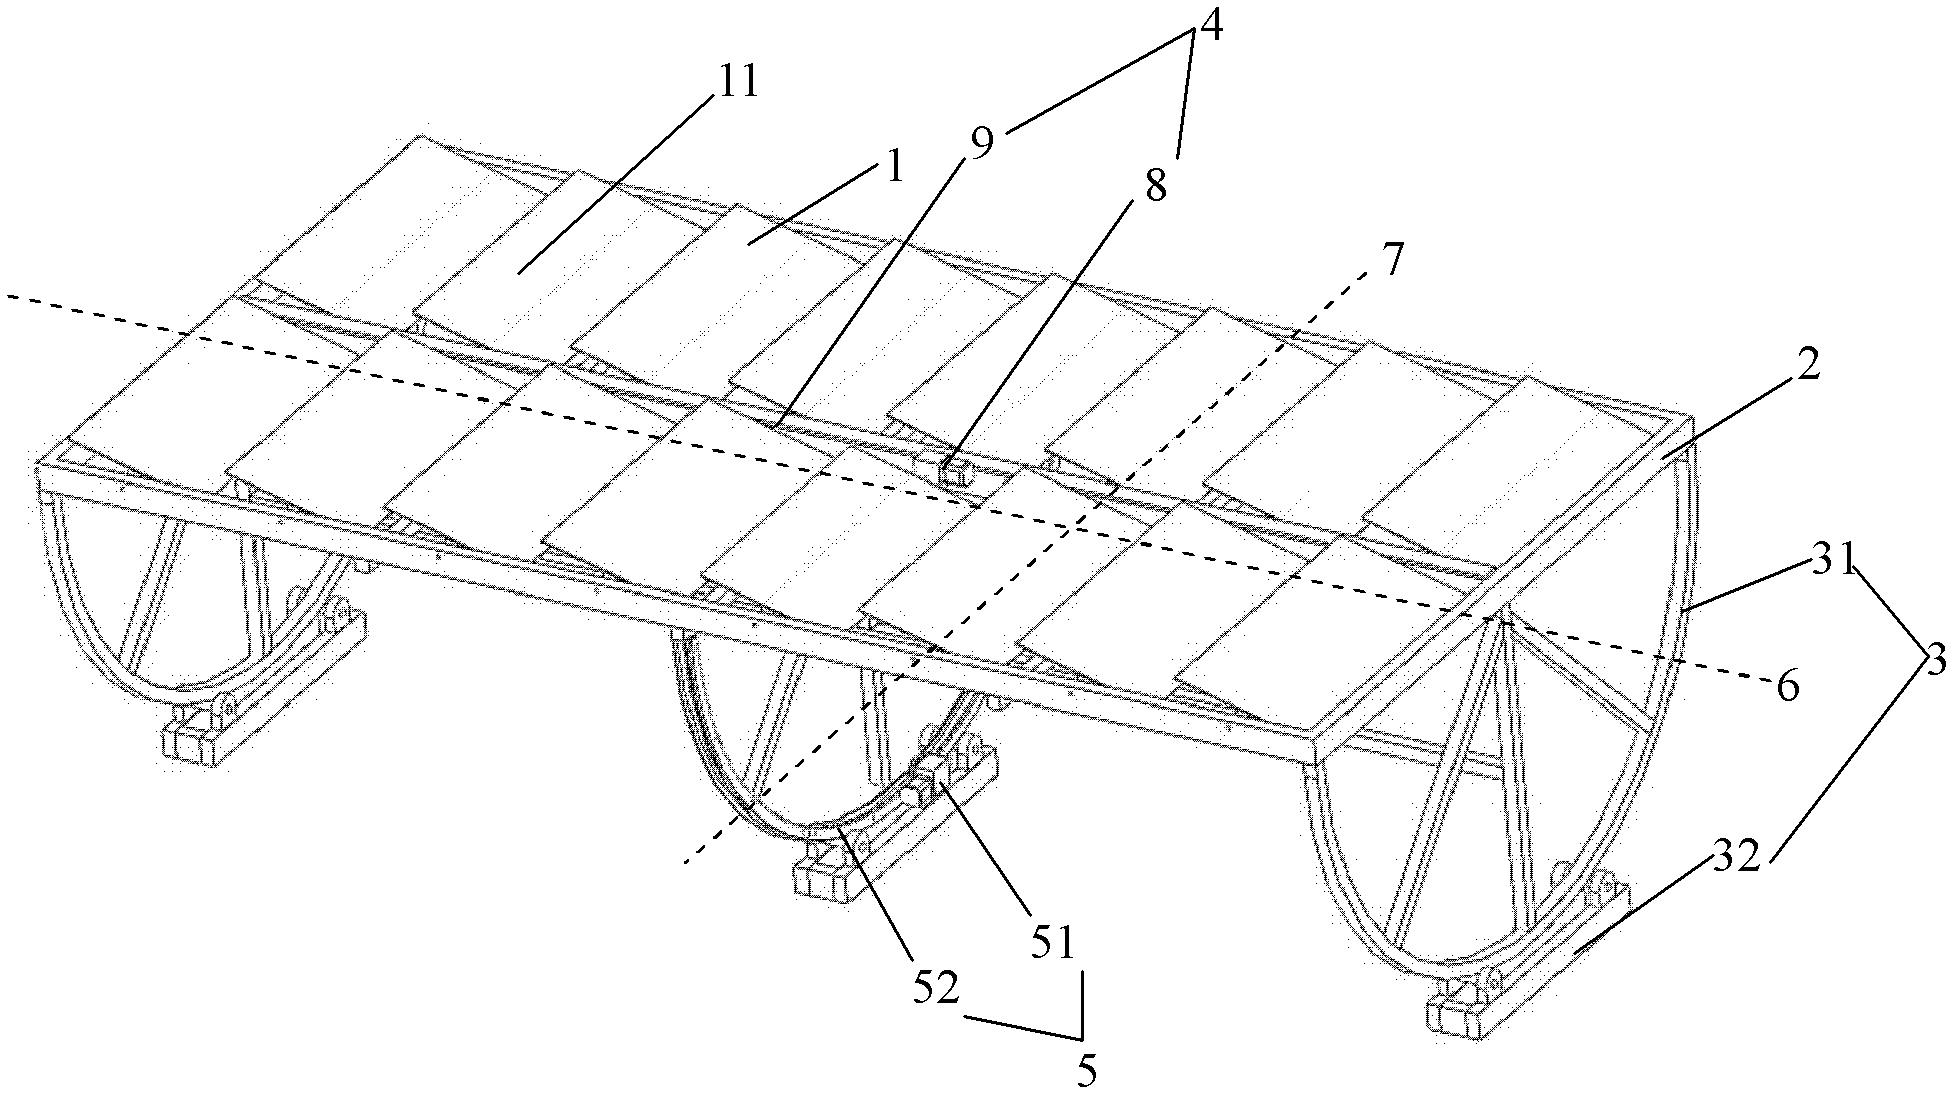 Heliostat system with function of sun pursuing